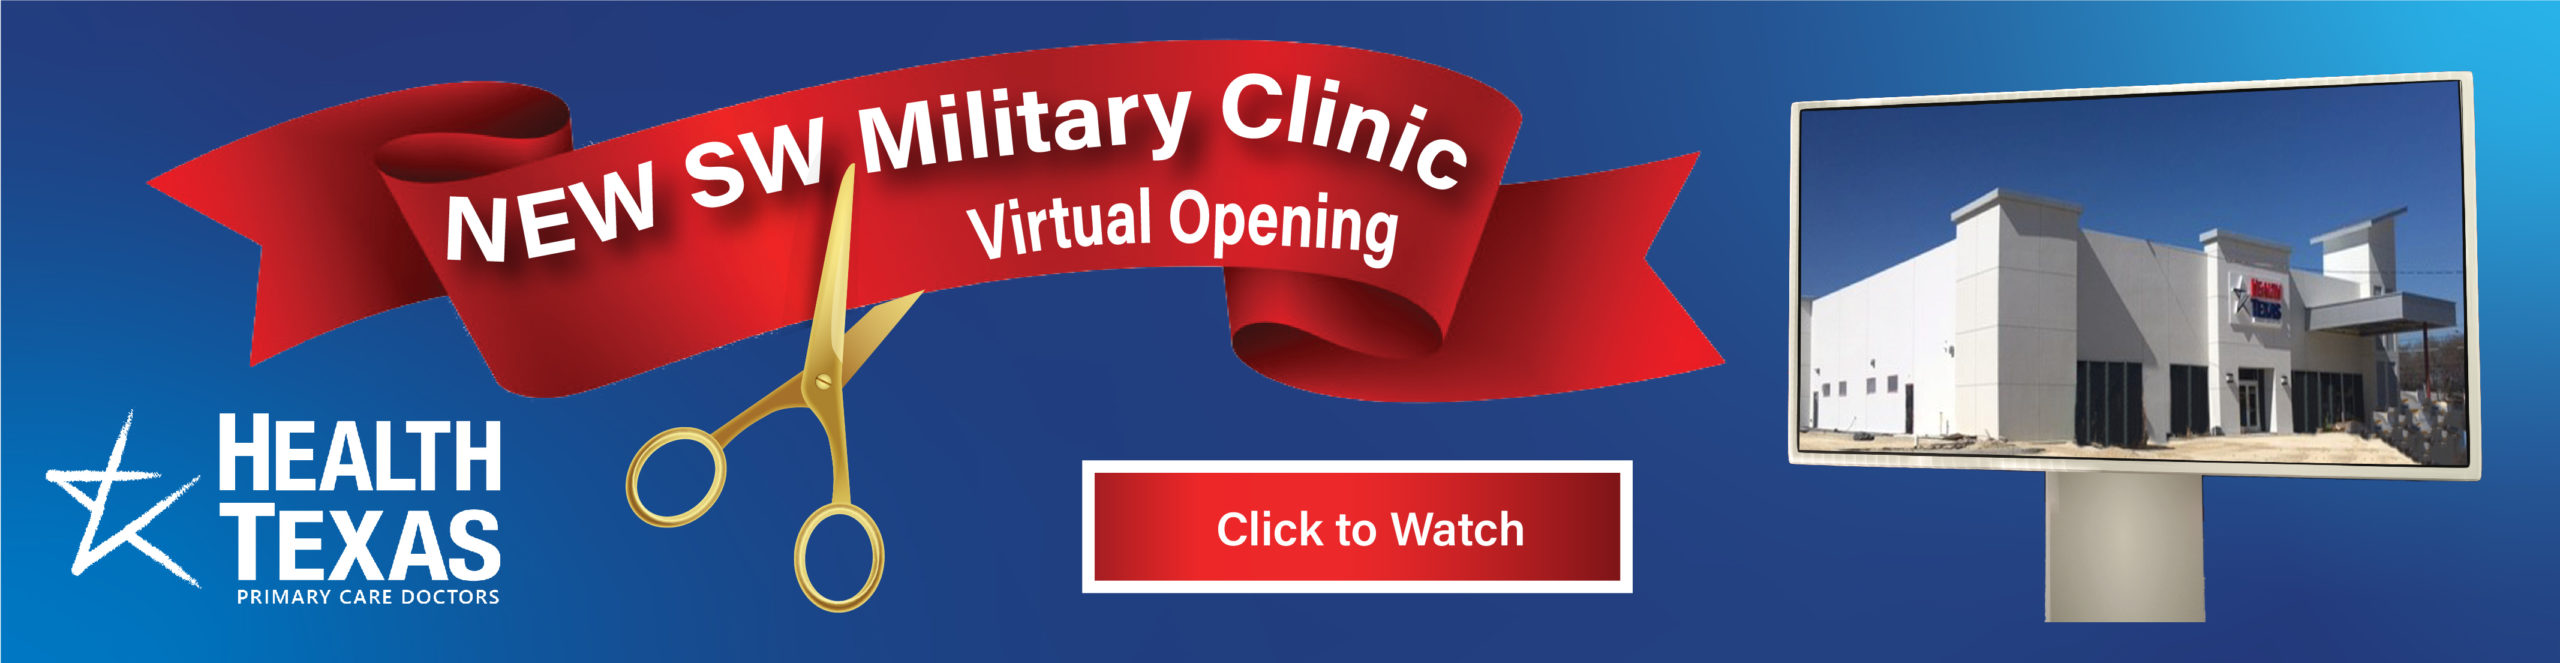 new SW Military Clinic Virtual Opening